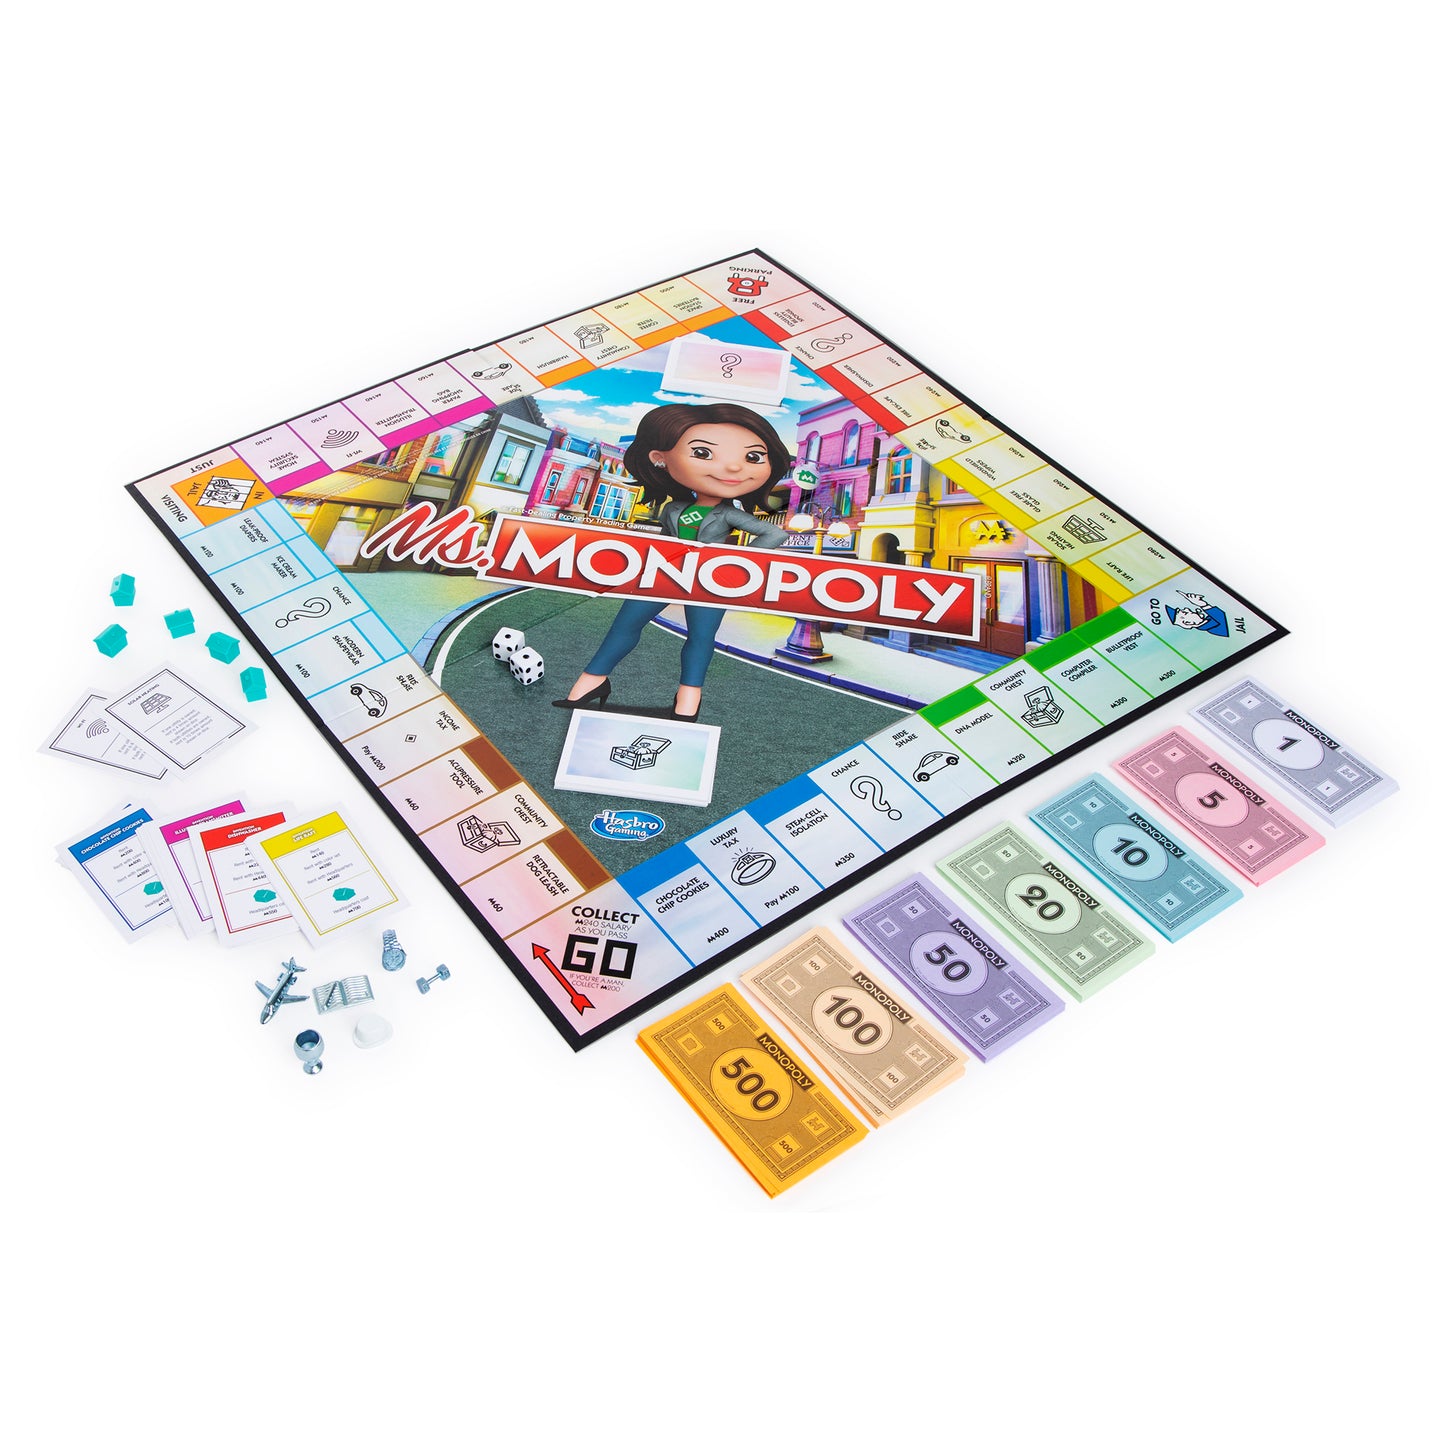 MS. MONOPOLY® BOARD GAME